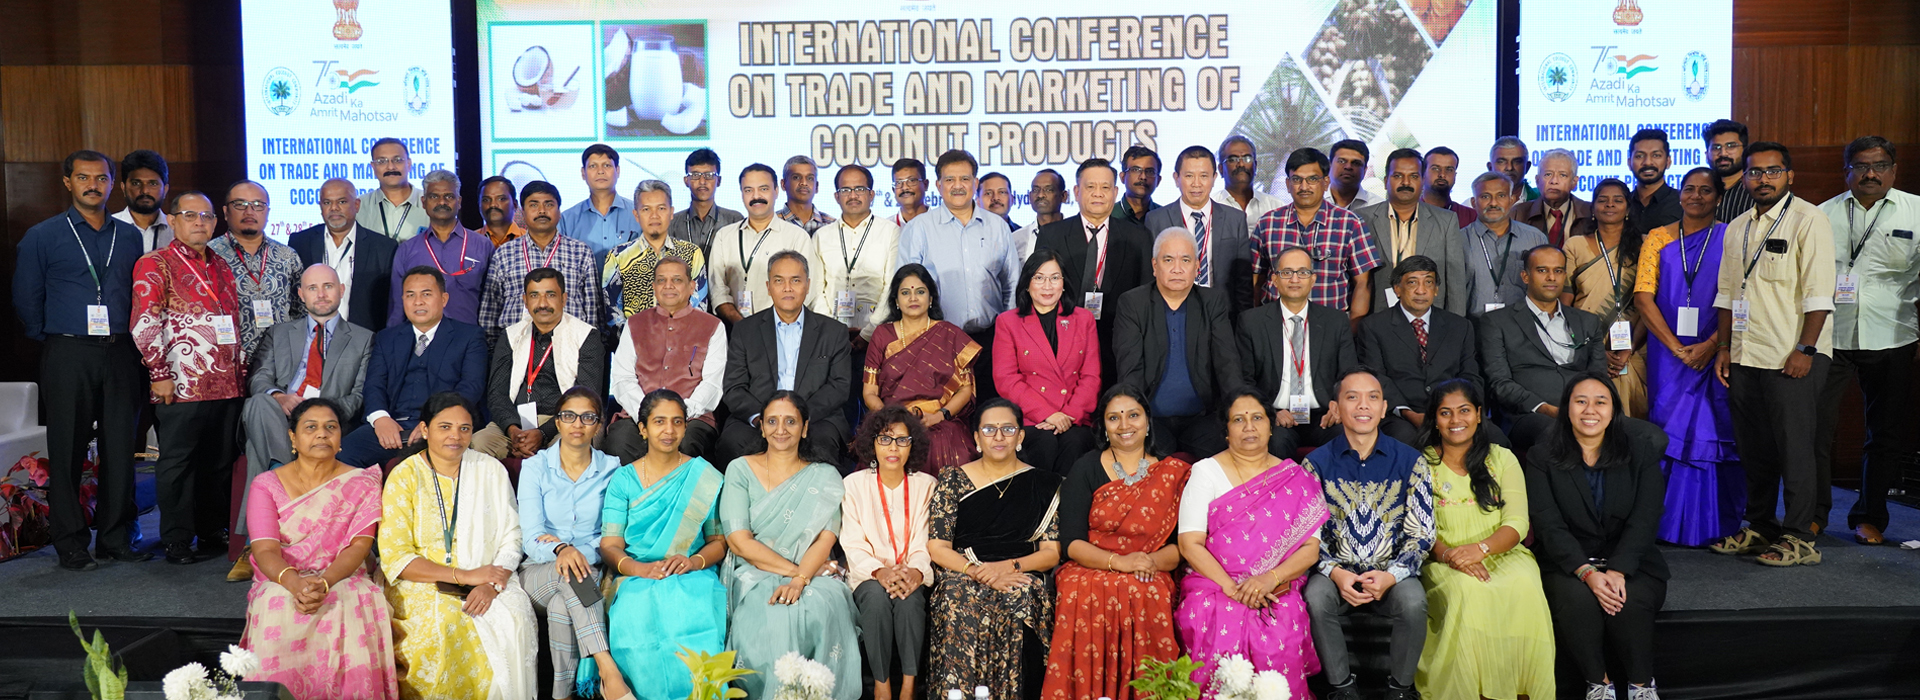 international-conference-on-trade-and-marketing-of-coconut-products20230309092502.jpg